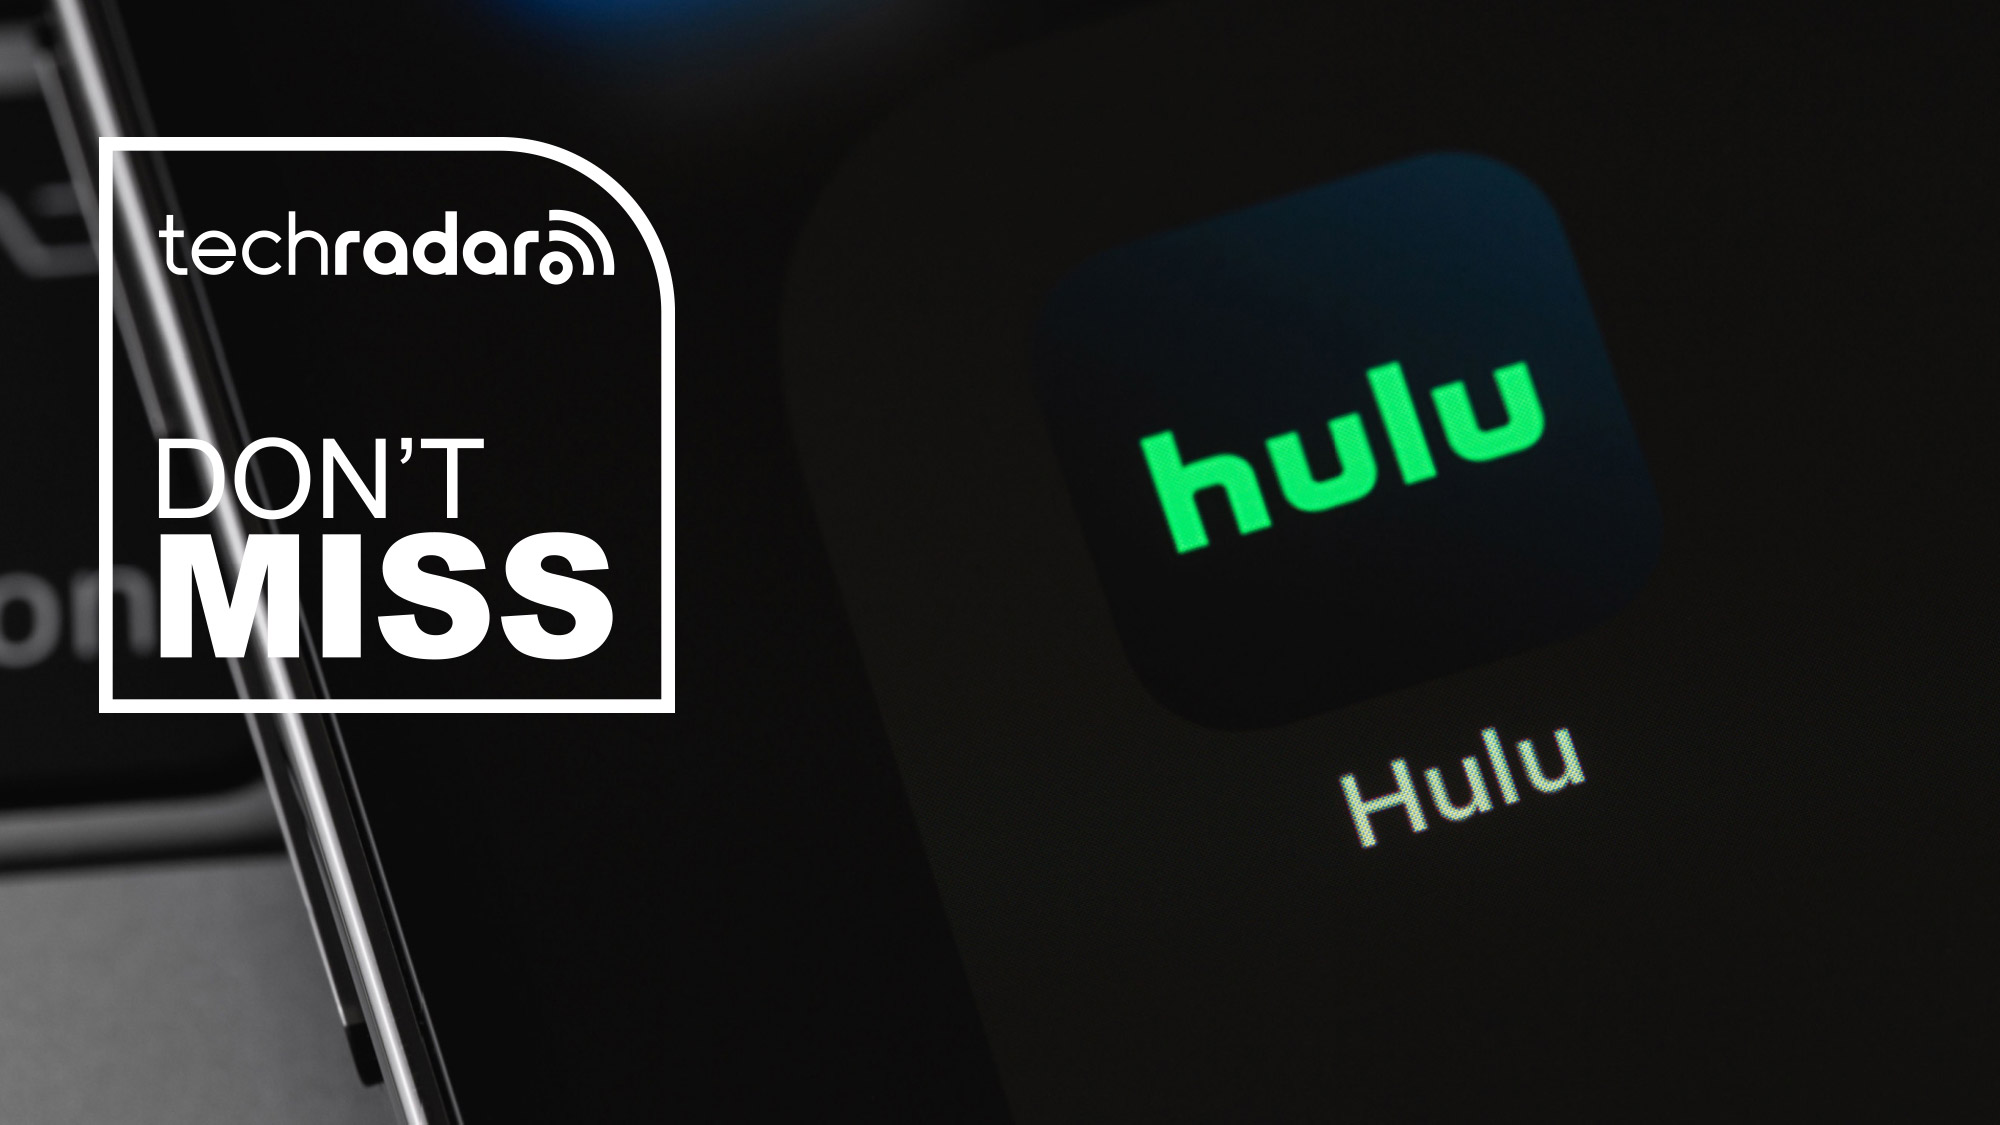 Holy Cow For The First Time In Years Hulu Is Just 099 A Month For Black Friday Techradar 5394